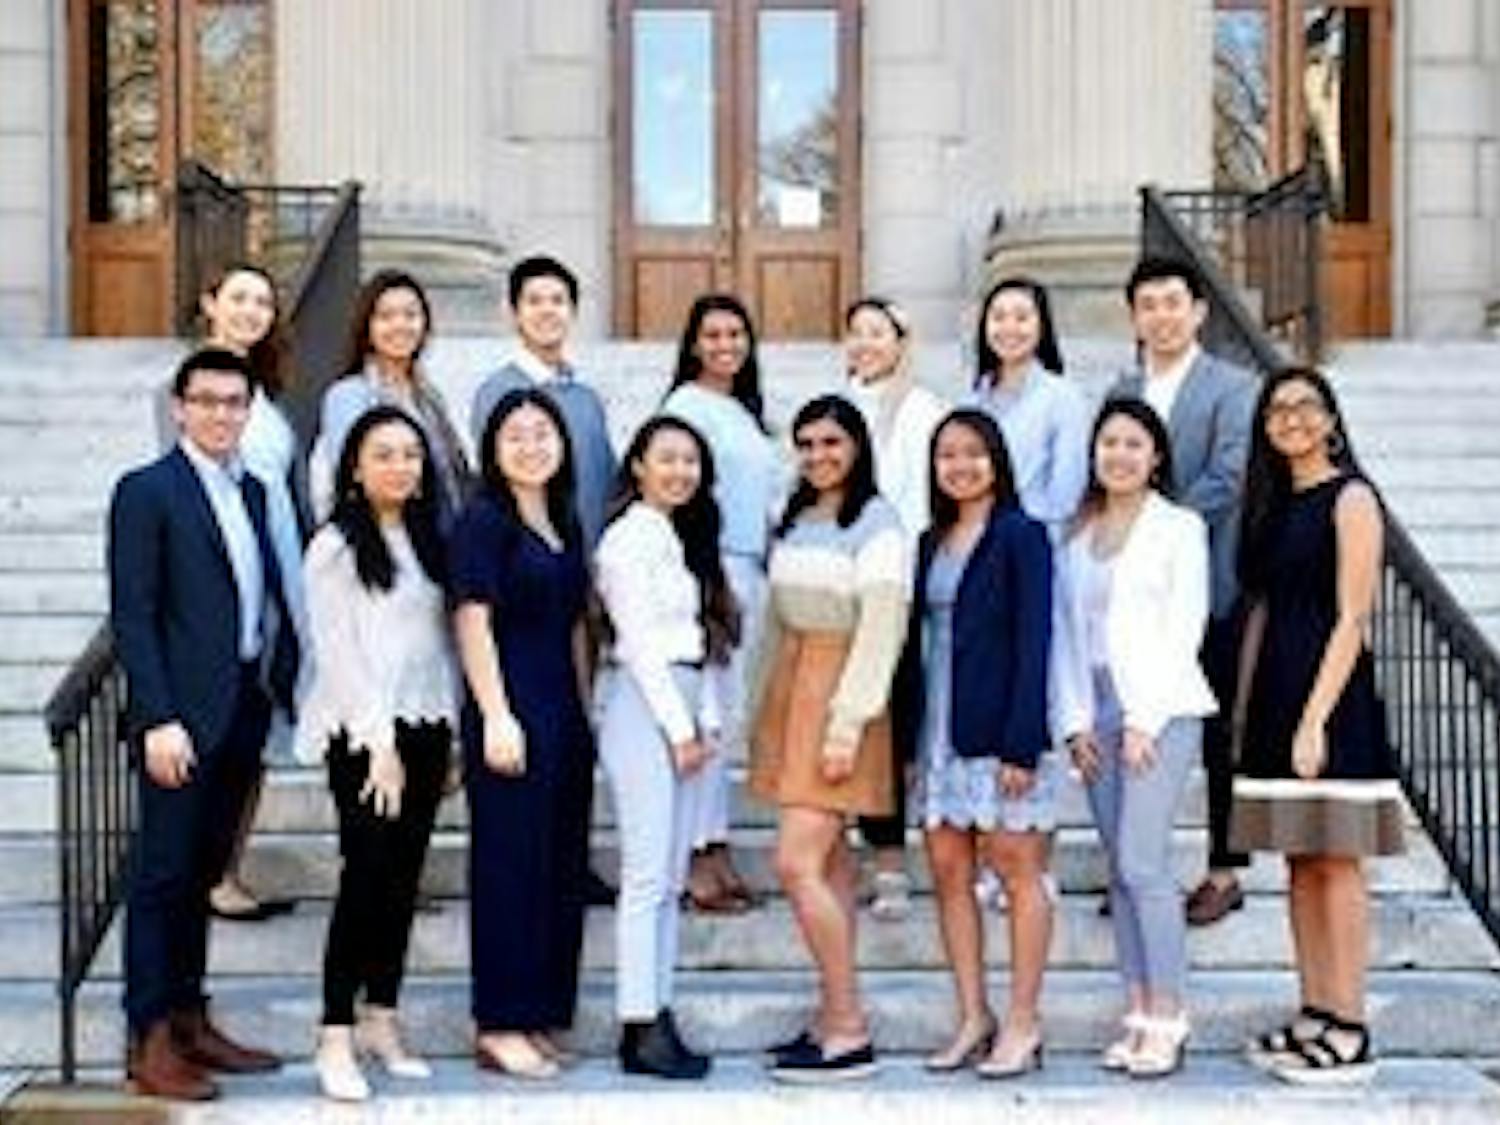 The Asian American Center Campaigns team poses for a portrait on the steps of Wilson Library. Photo courtesy of Lynne Chen.